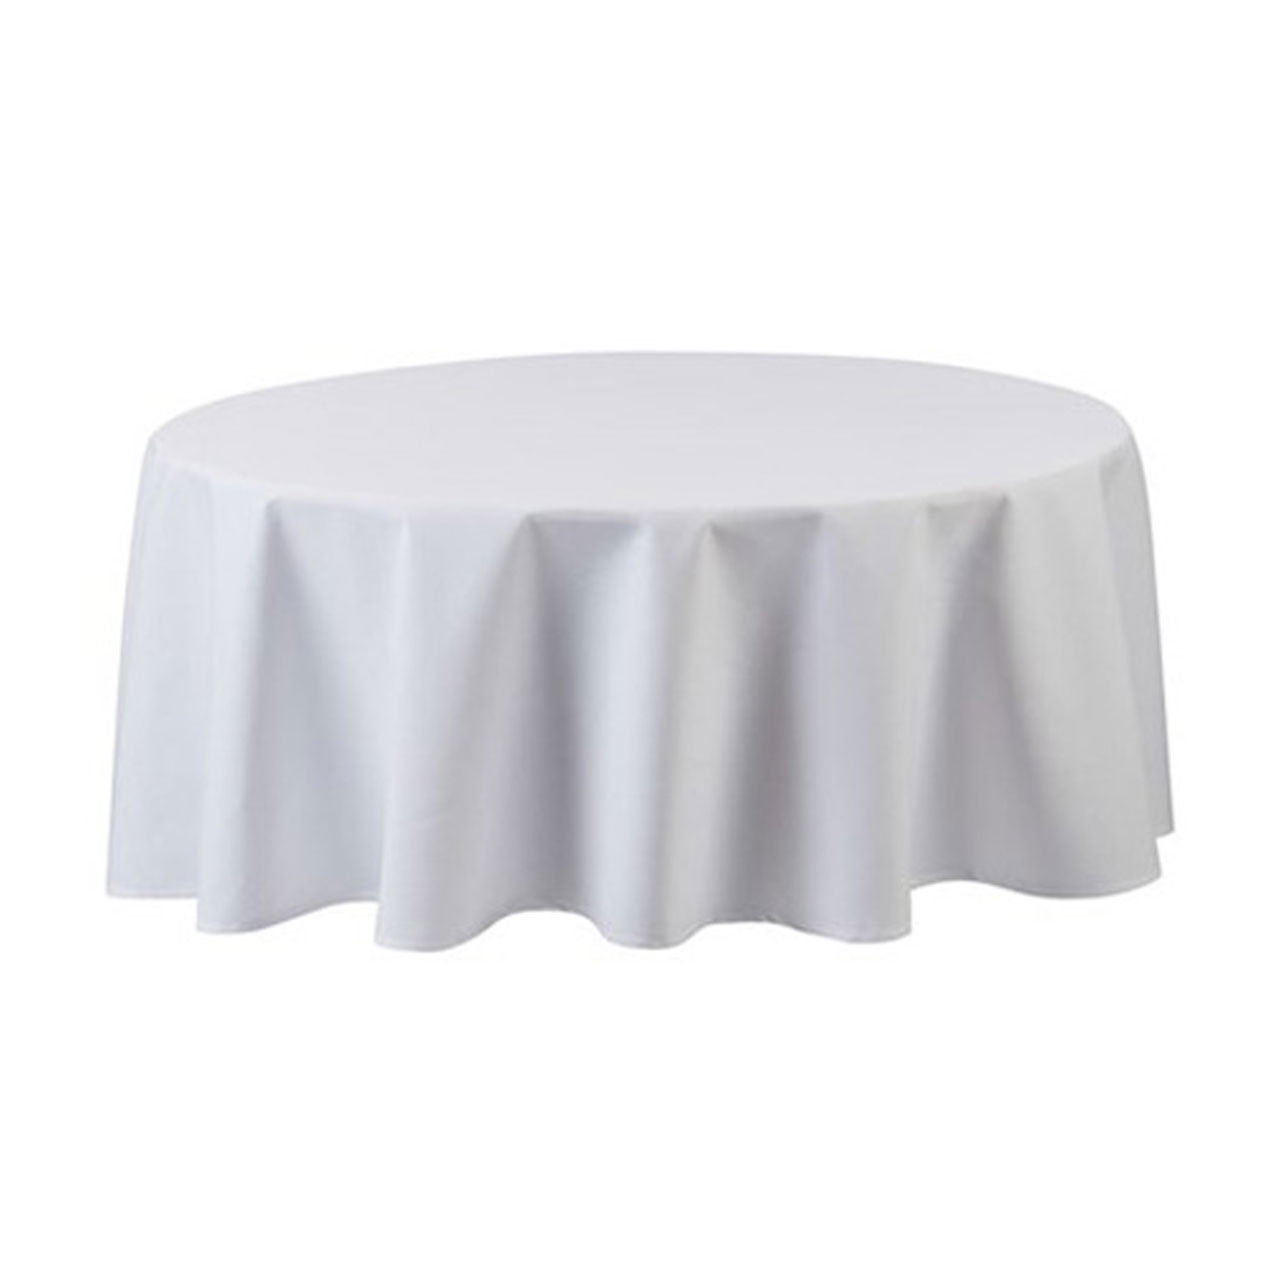 What type of finish does the Seamless White 120 Round Tablecloth have?